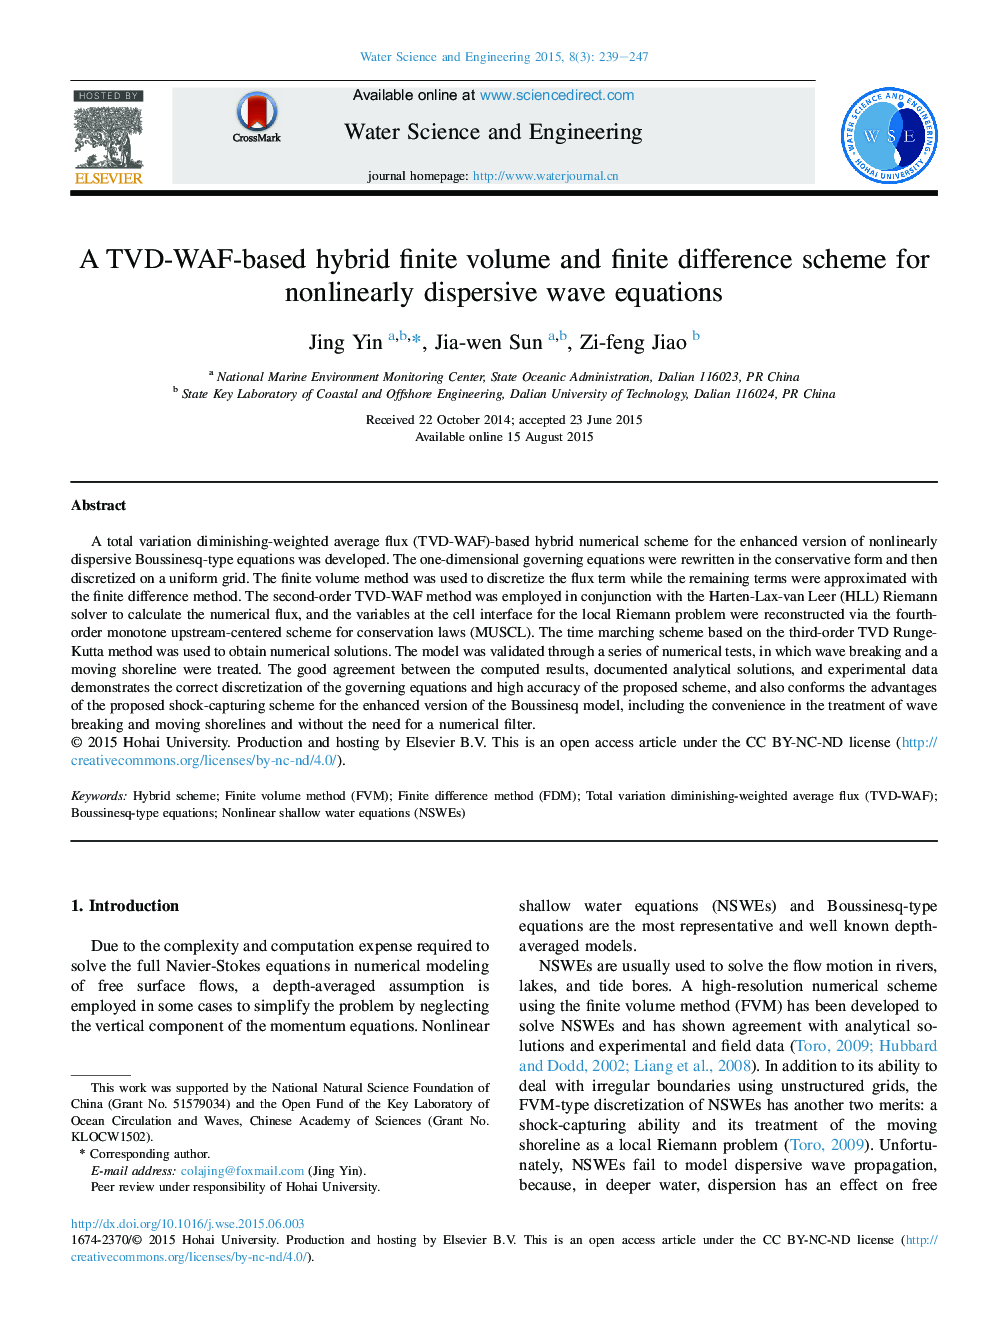 A TVD-WAF-based hybrid finite volume and finite difference scheme for nonlinearly dispersive wave equations 